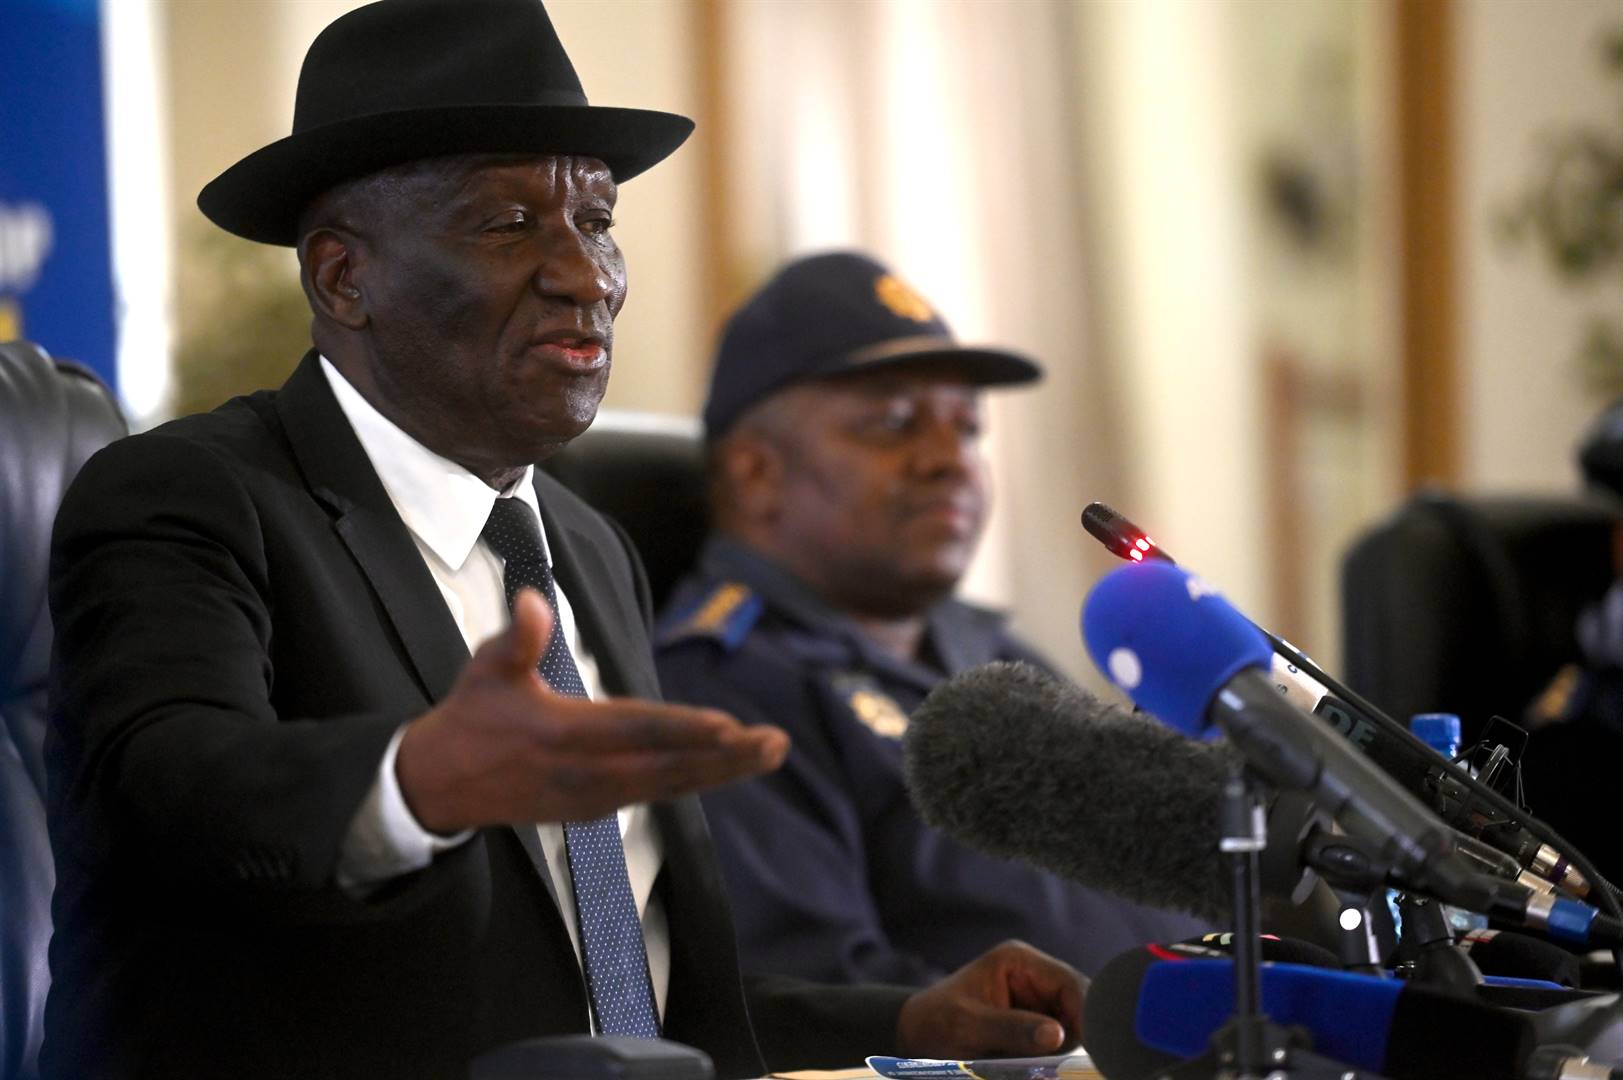 'I don't want to count officers on the ground, but illegal miners' - Cele vows 'hard' response - News24